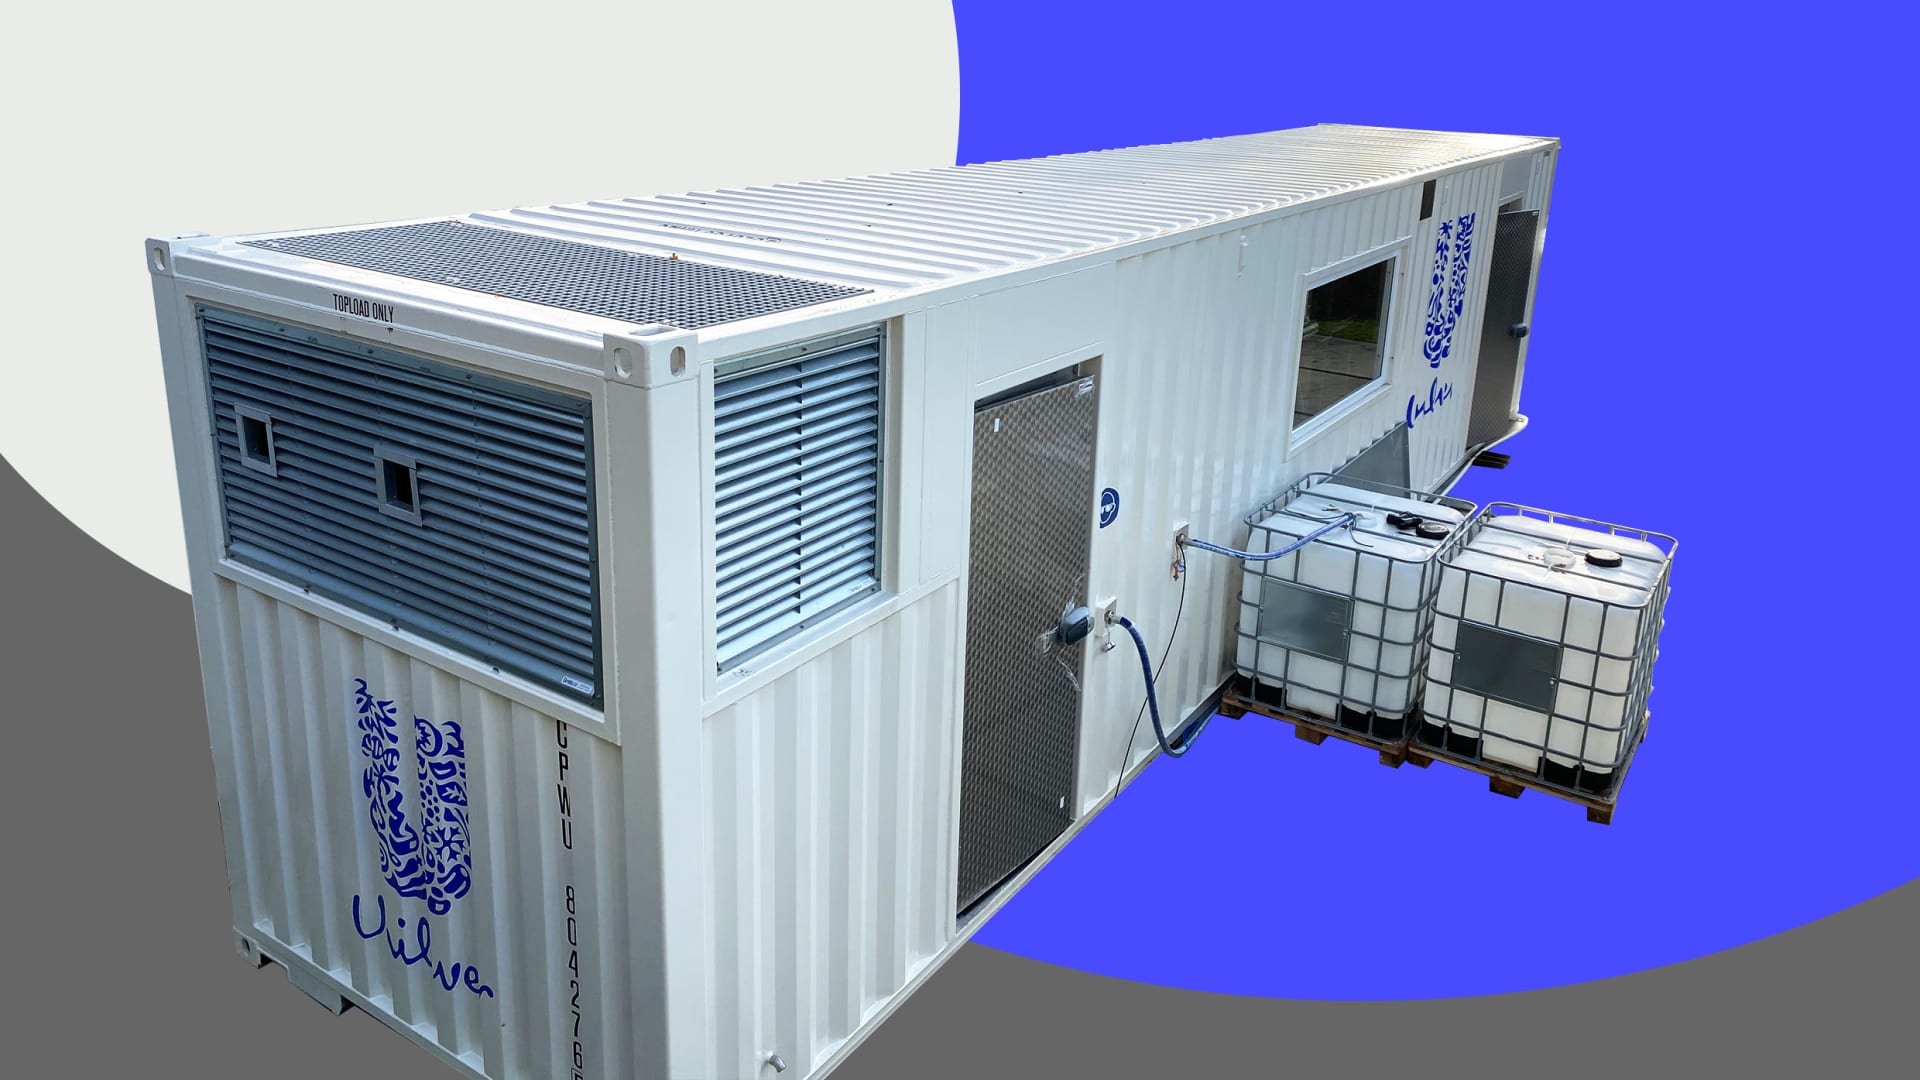 Unilever’s new nano-factories fit in a shipping container, so they can go anywhere in the world